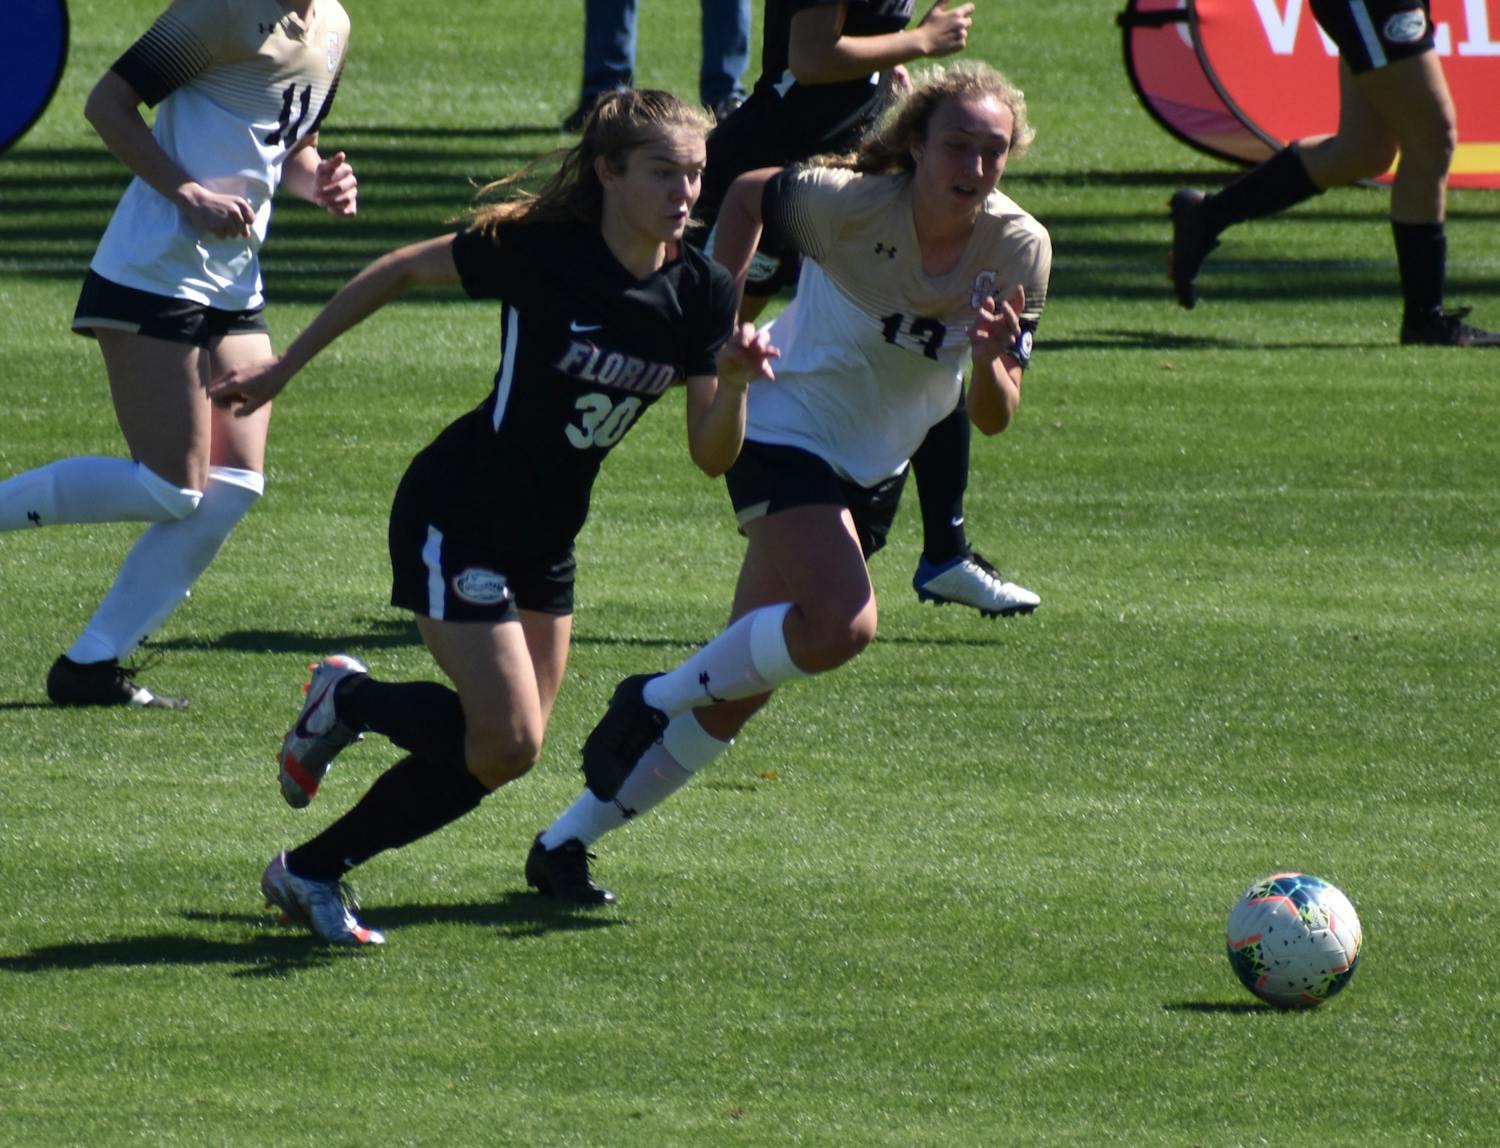 Florida striker Beata Olsson dribbles past a defender Feb. 20 against College of Charleston. The Swedish international scored an early equalizer Monday.